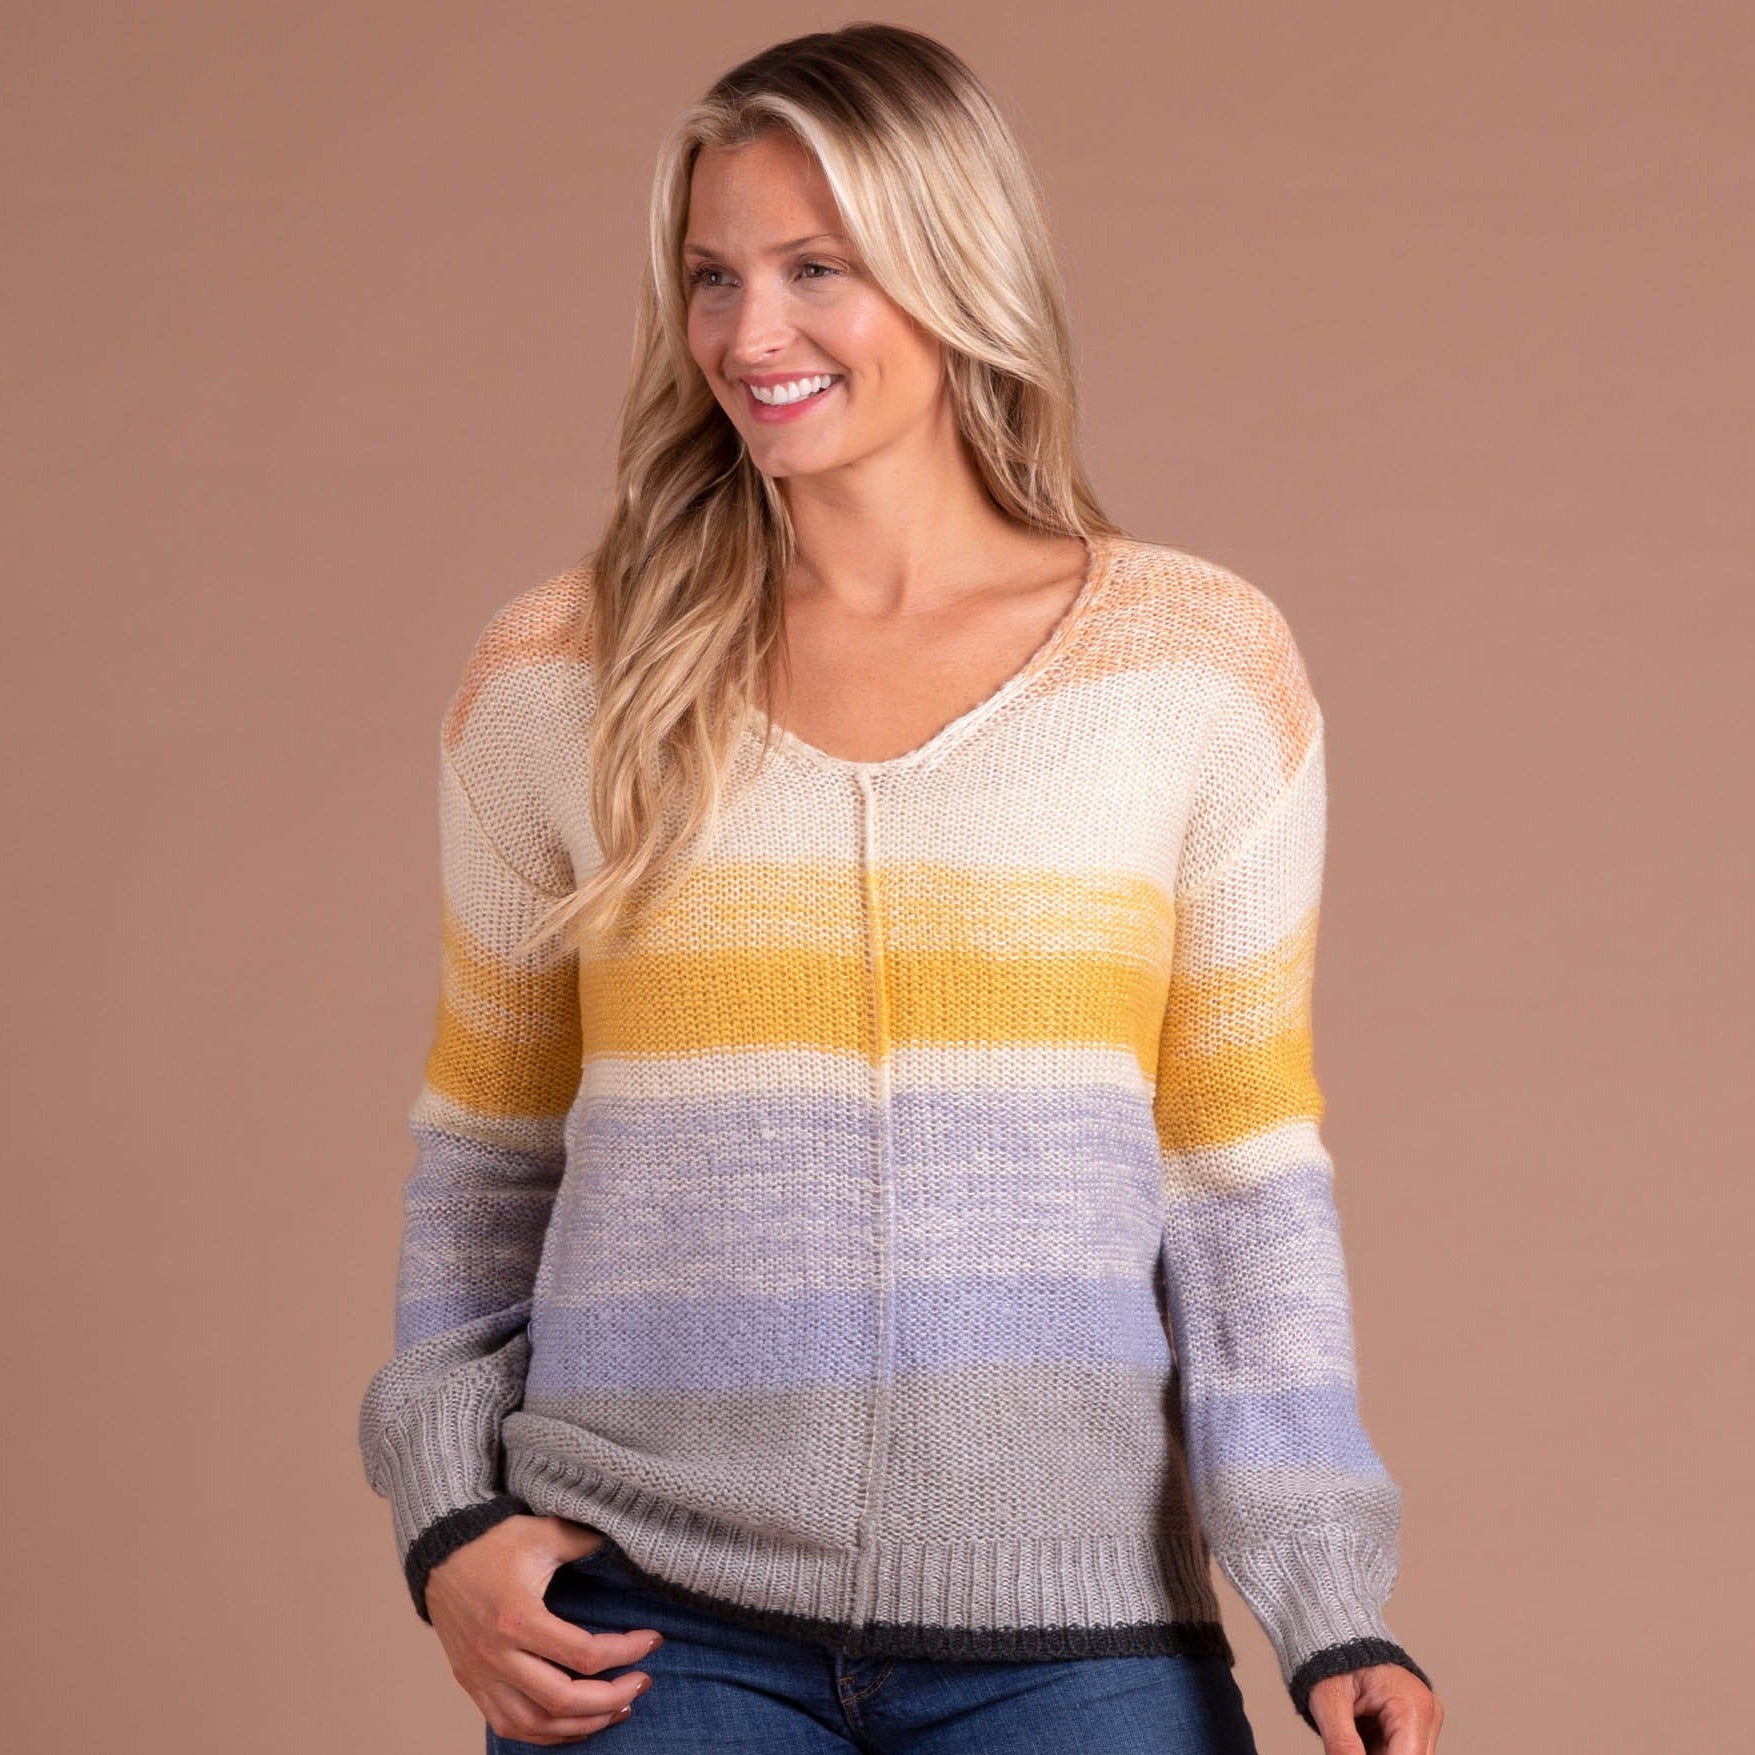 Colorful Stripes Pullover V-Neck Sweater - Mint - S/M